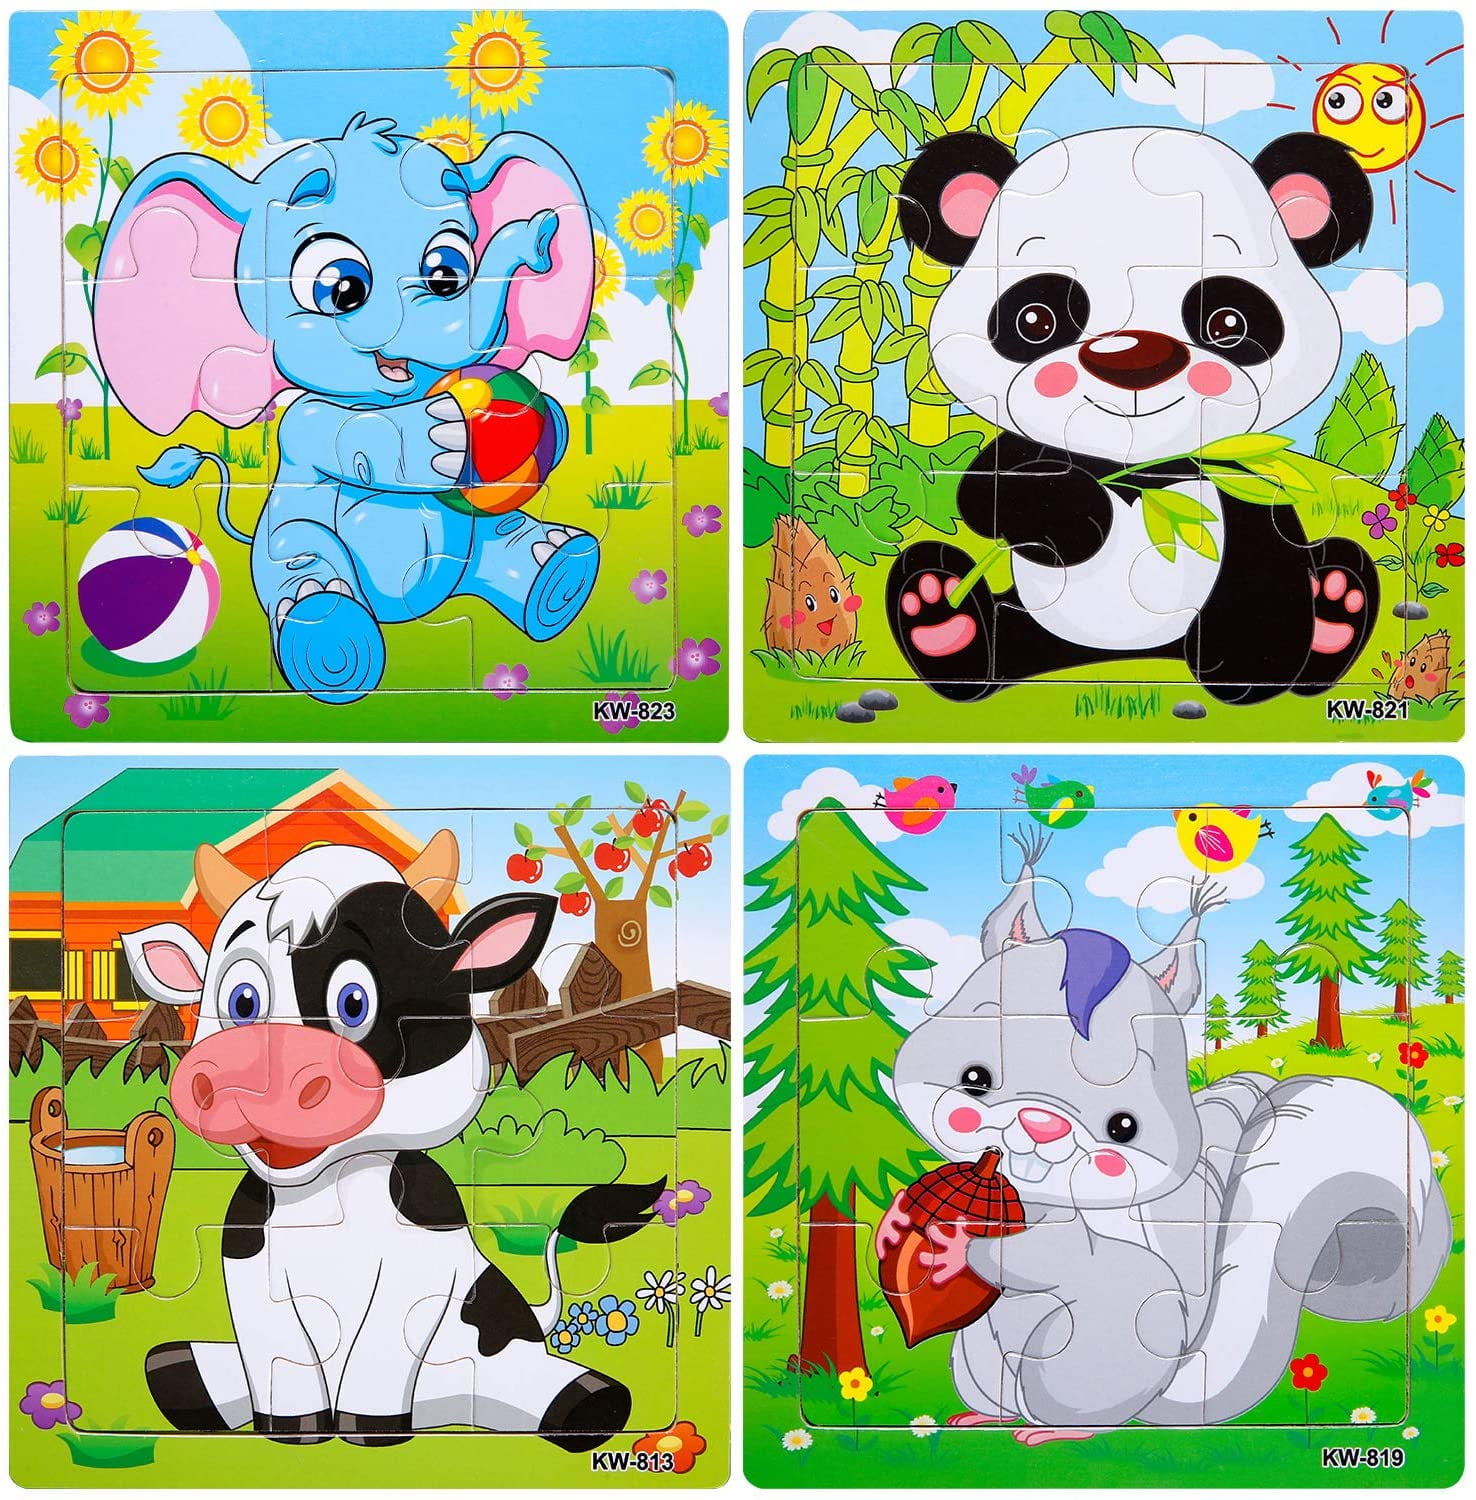 Wooden Jigsaw Puzzles for Kids Age 2-5 Year Old Animals Preschool Puzzles for Toddler Children Learning Educational Puzzle Toys for Boys and Girls Set of 4 Puzzles